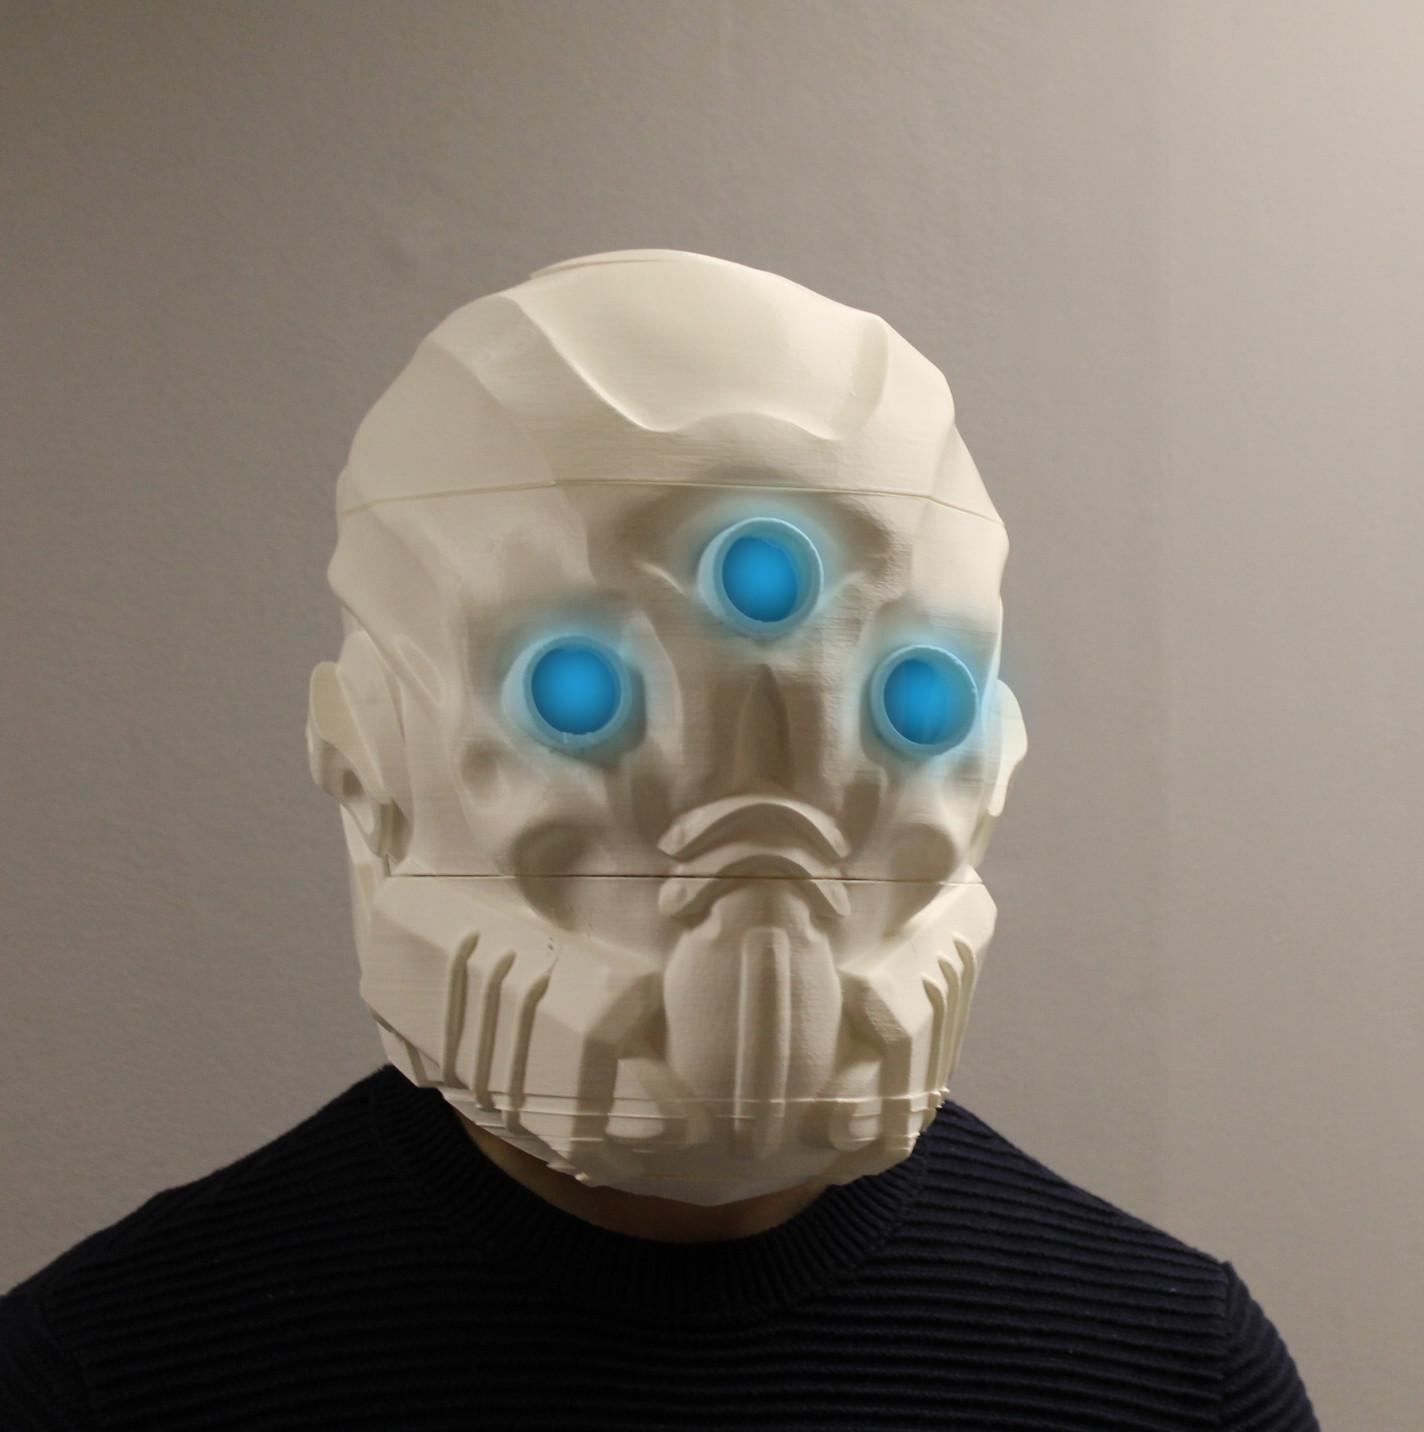 You Can Now 3D Print Your Very Own ‘Mask of the Third Man’ from Destiny